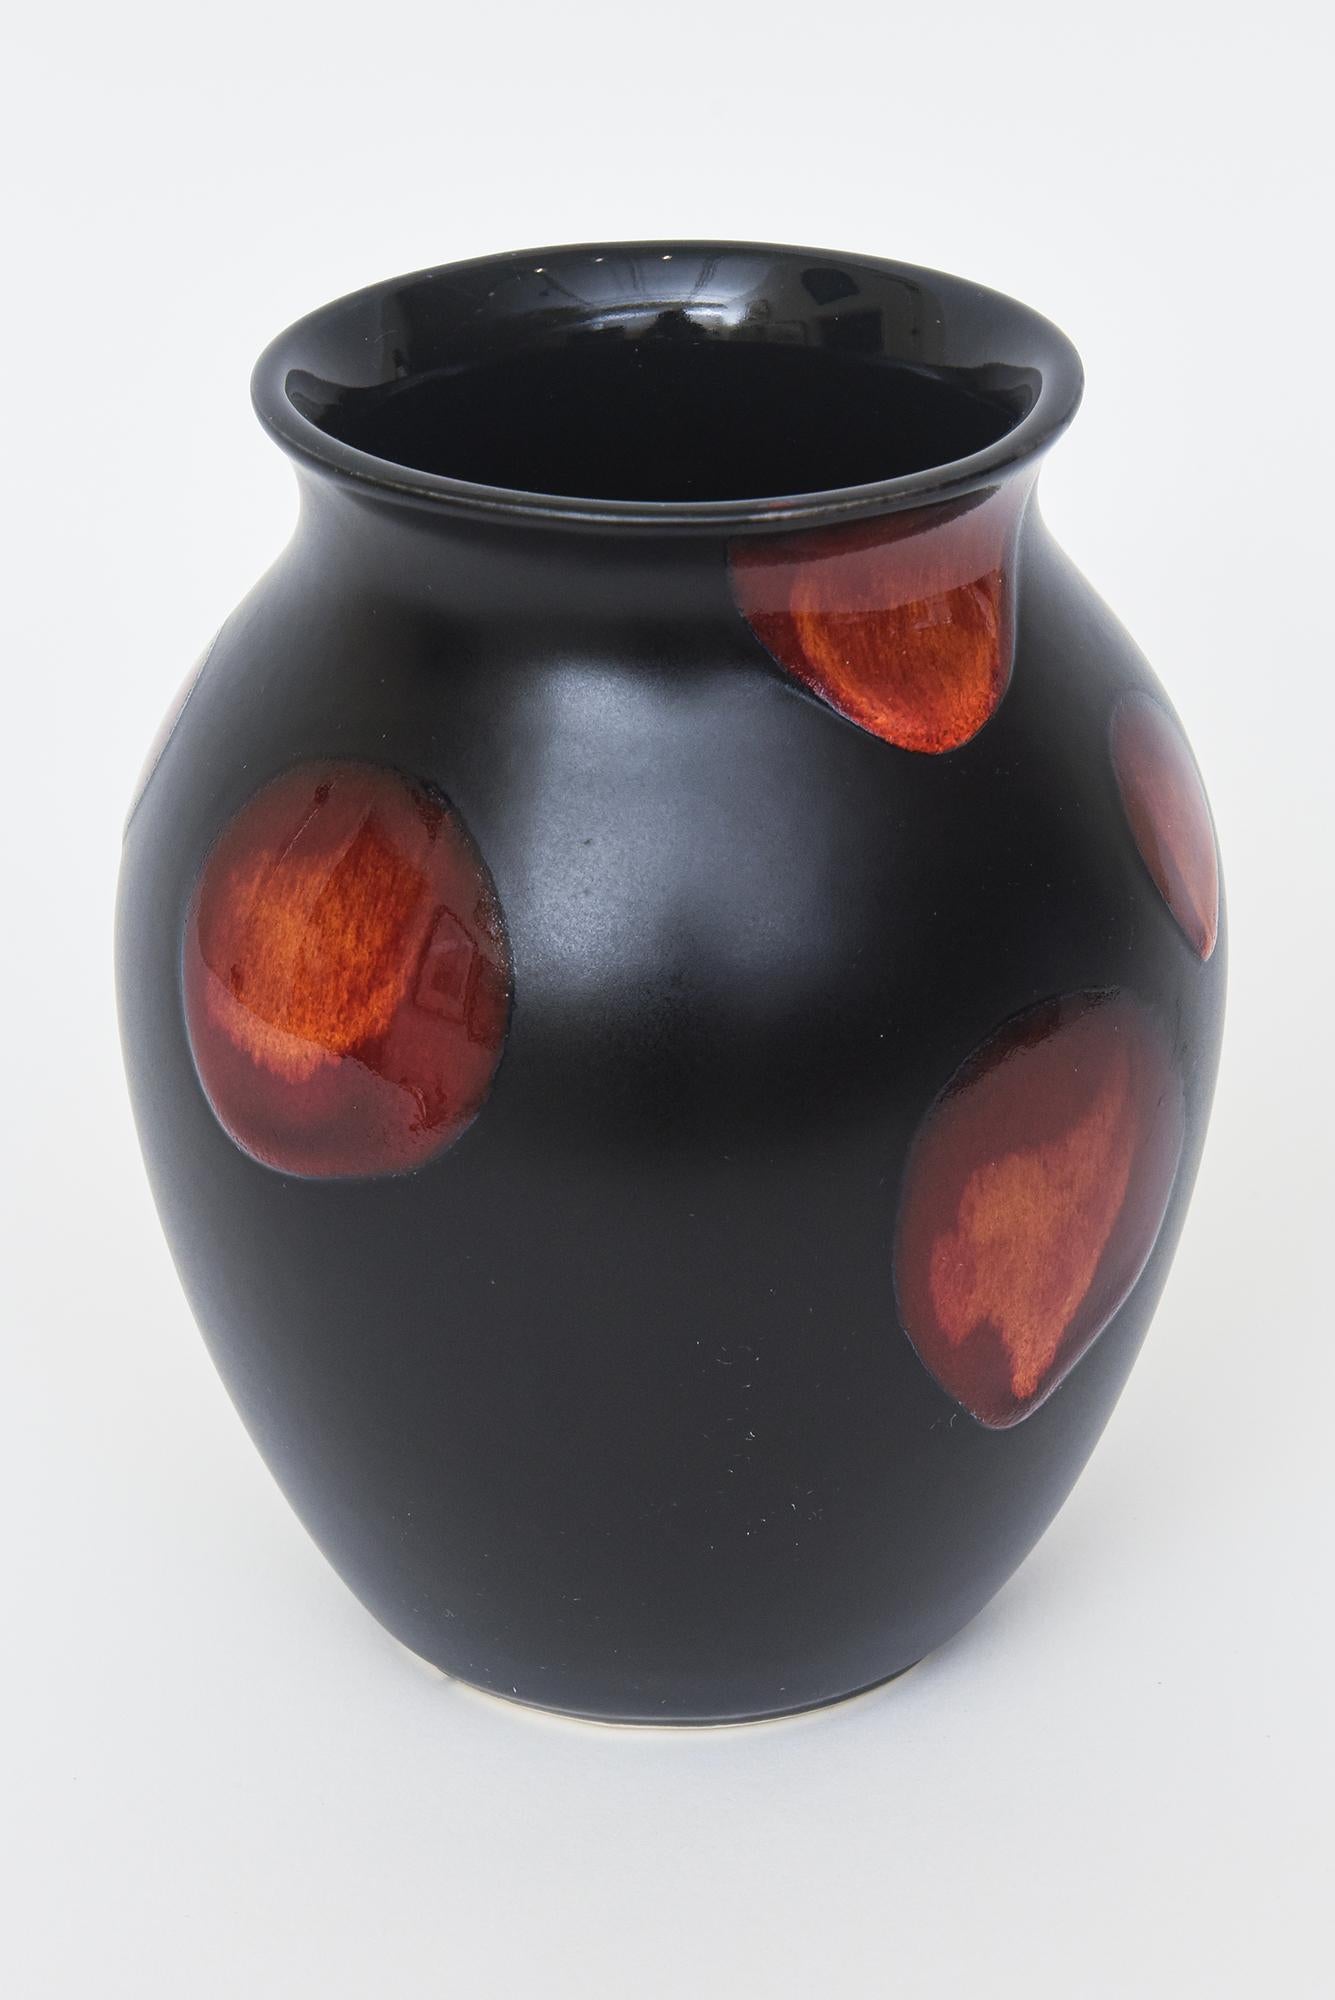 This lovely small bulbous vintage ceramic vase is from the 60's and made by Poole Pottery from England. It has red abstracted blobs against the black background randomly placed.  It is hallmarked on the bottom with a dolphin cartouche with many